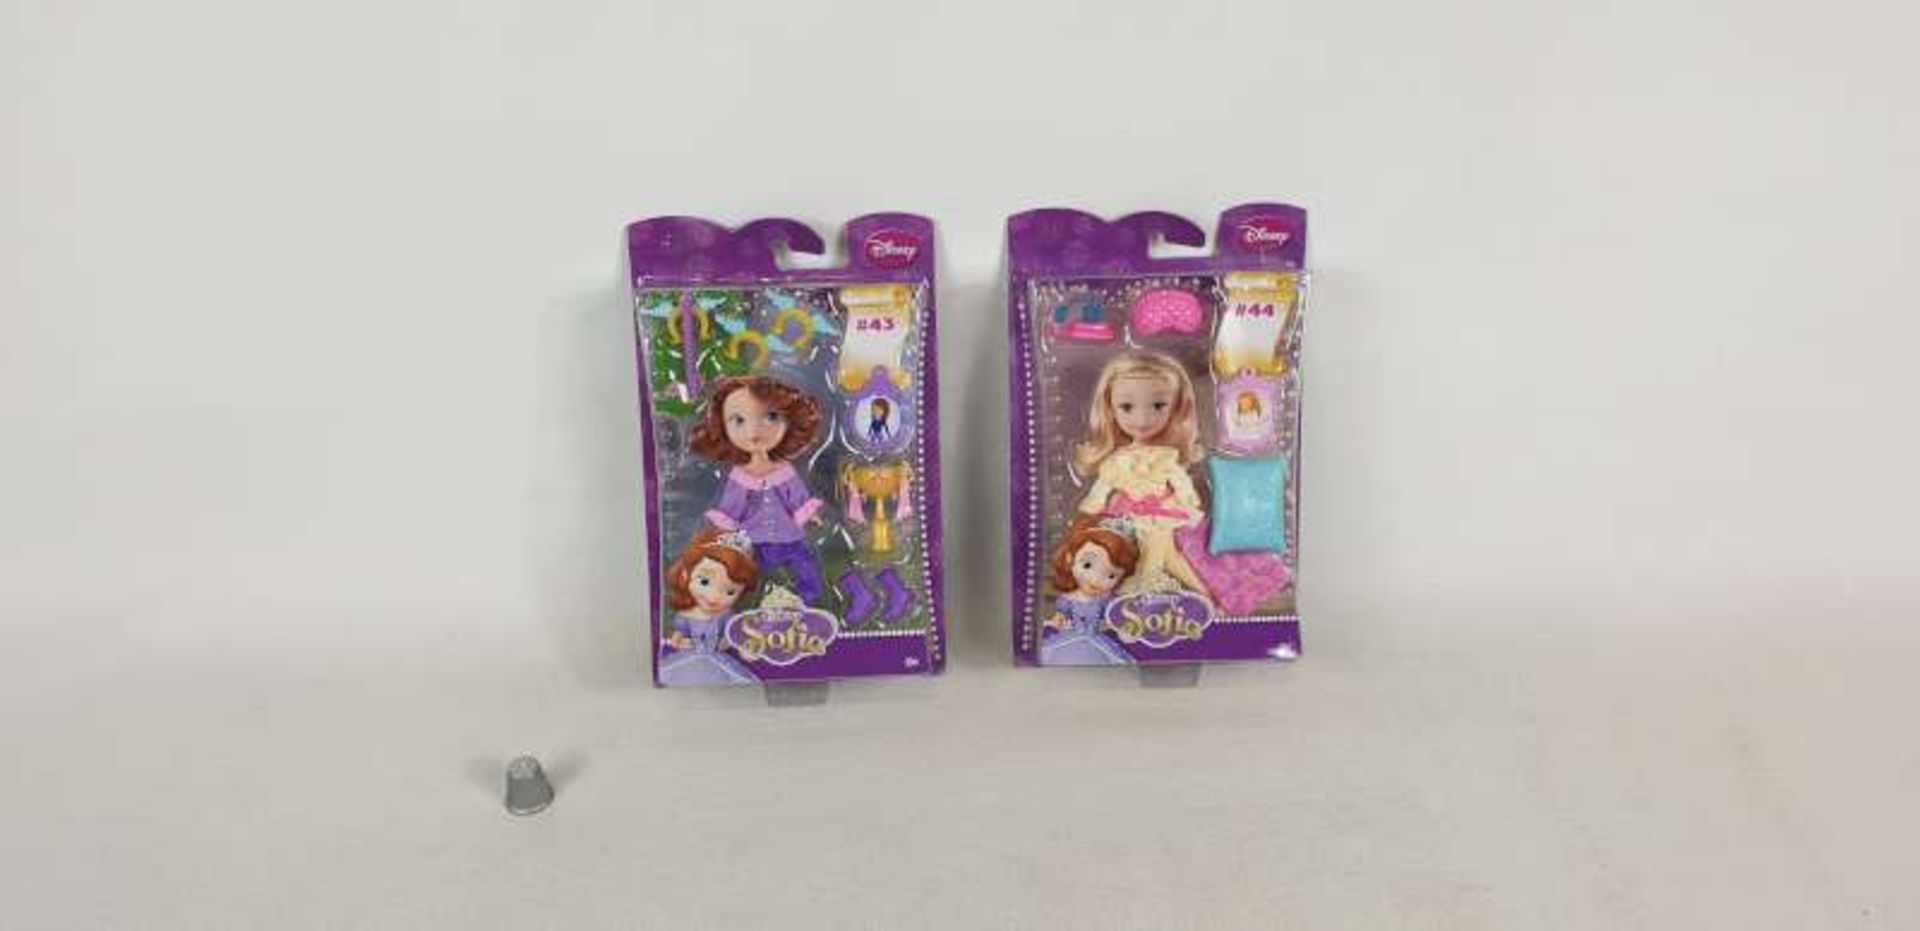 48 X DISNEY SOFIA THE FIRST FASHION DOLL CLOTHING SETS IN 6 BOXES